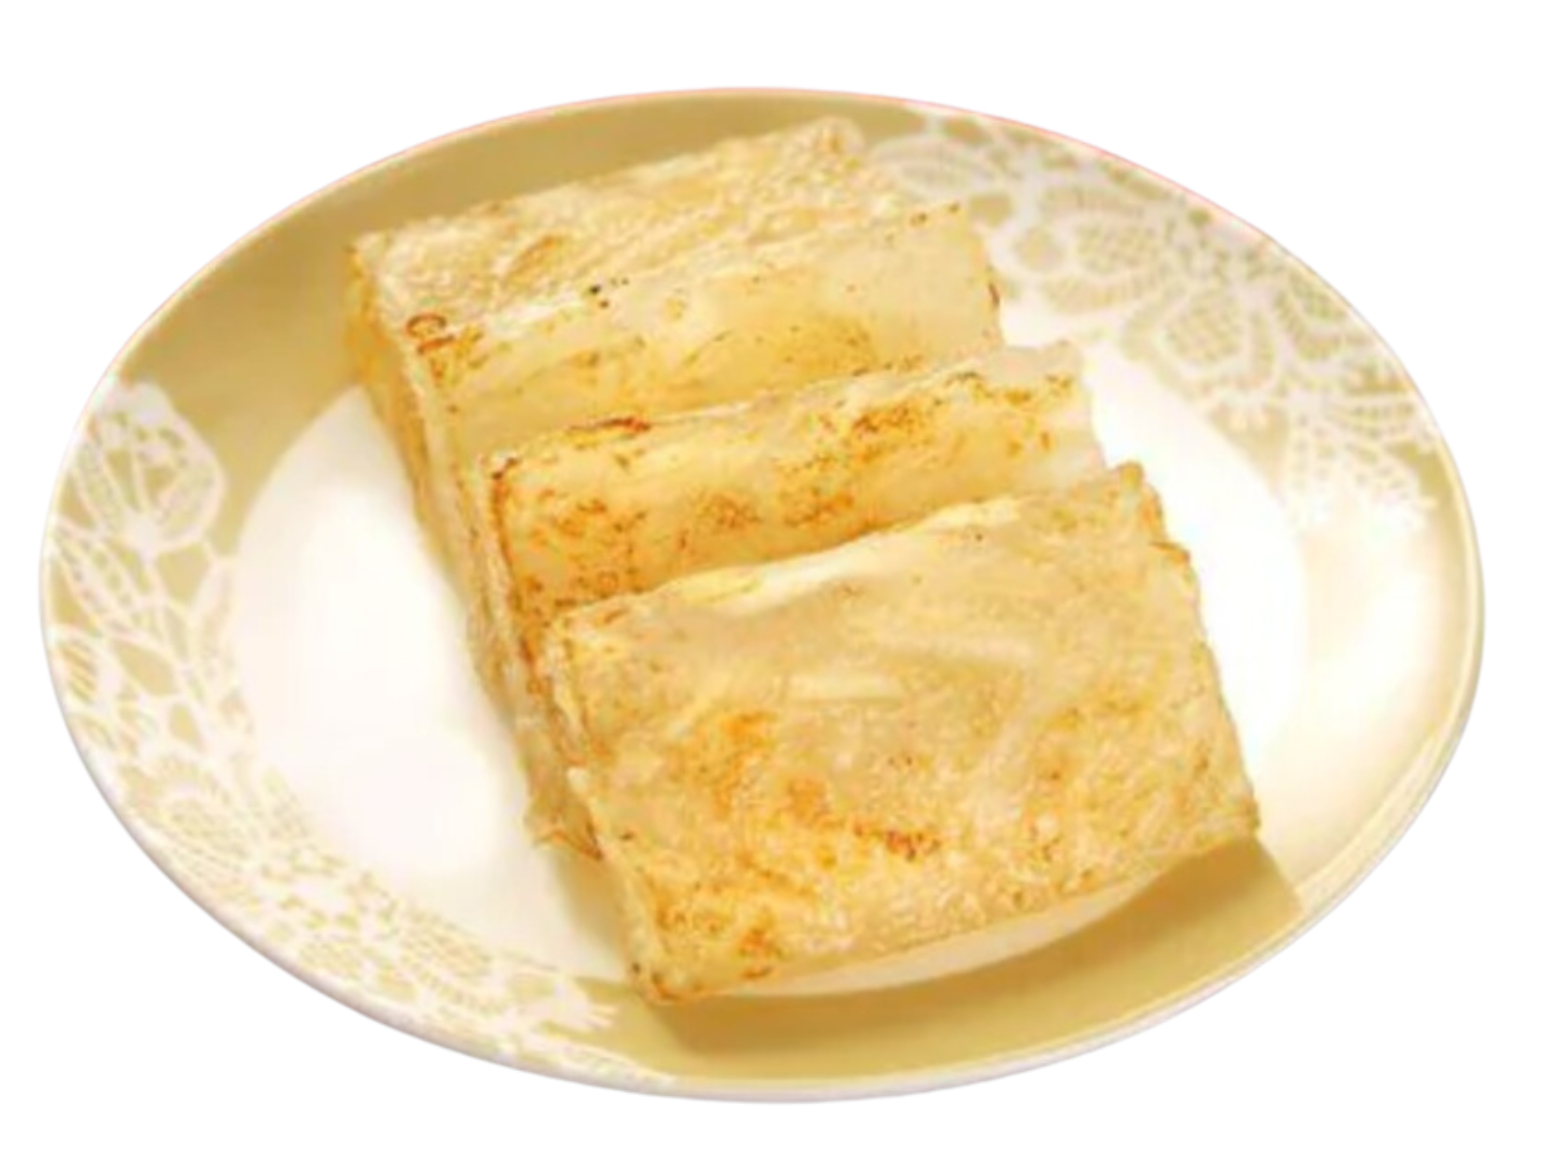 Tim Ho Wan | Water Chestnut Cake (Physical Coupon)